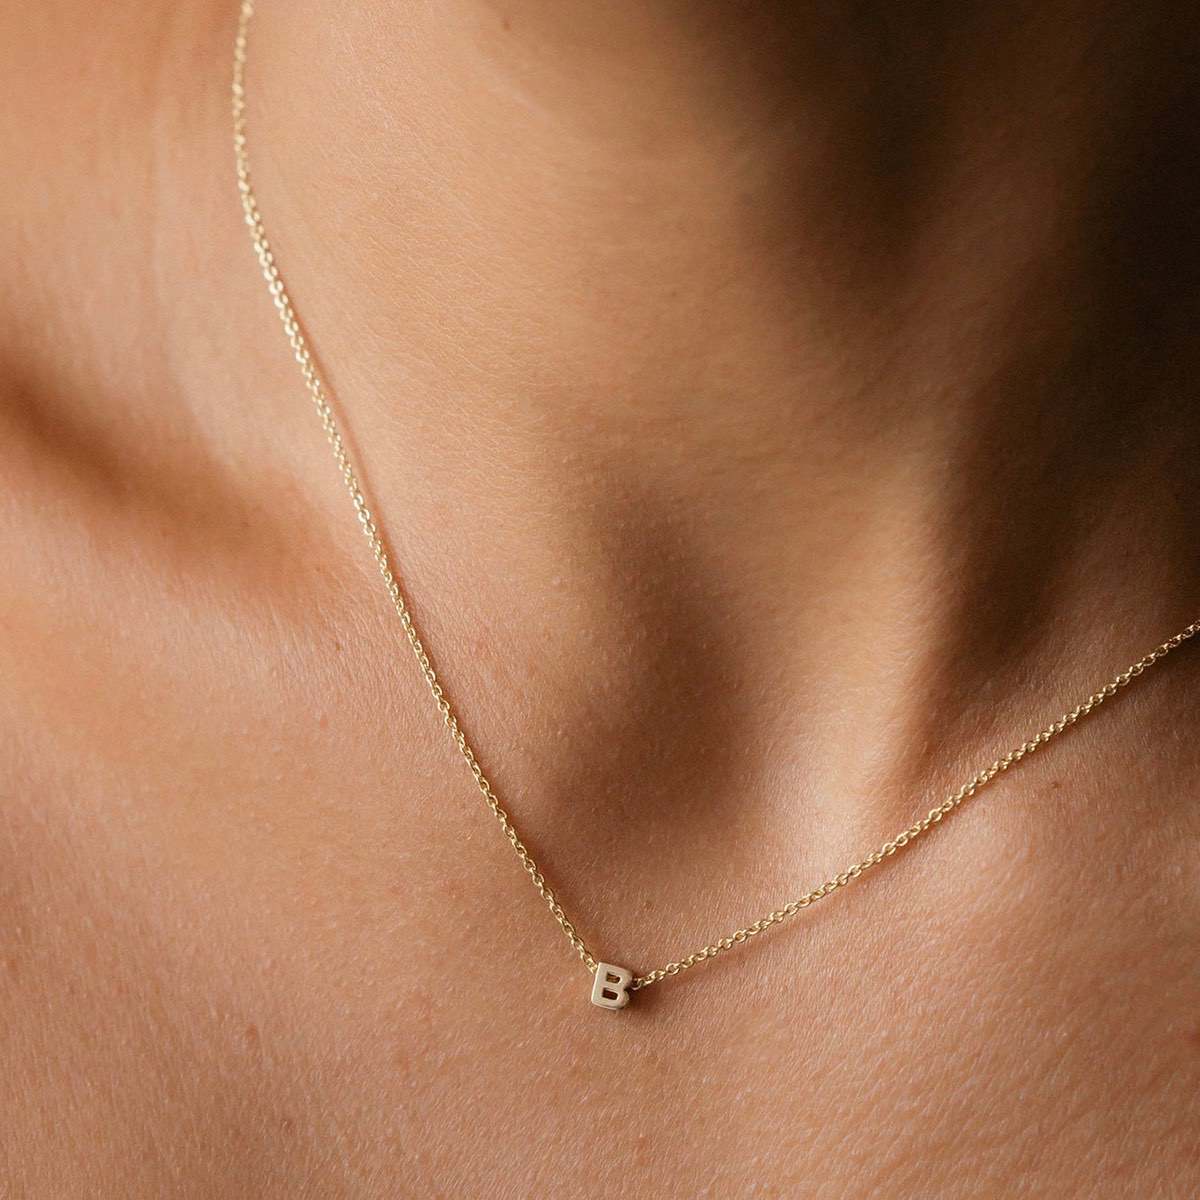 Hand finished solid gold letter necklace: Close up of a model wearing our beautiful 9ct yellow gold Tiny Letter B Charm Necklace with a 40cm cable chain